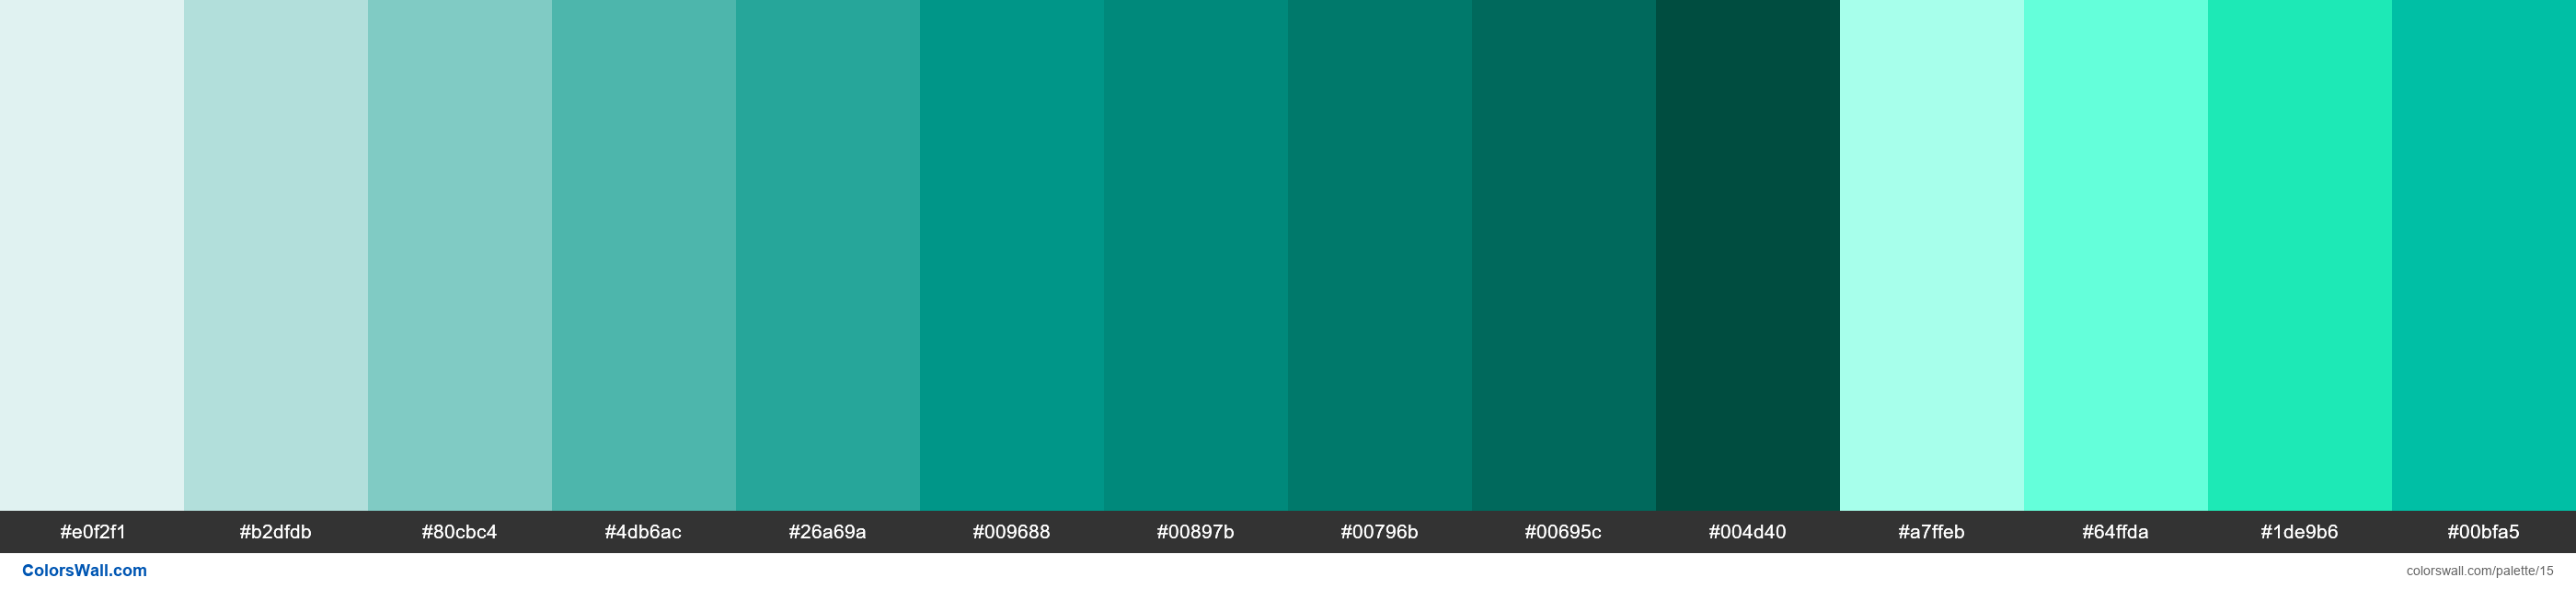 Teal palette Materialize CSS - #15